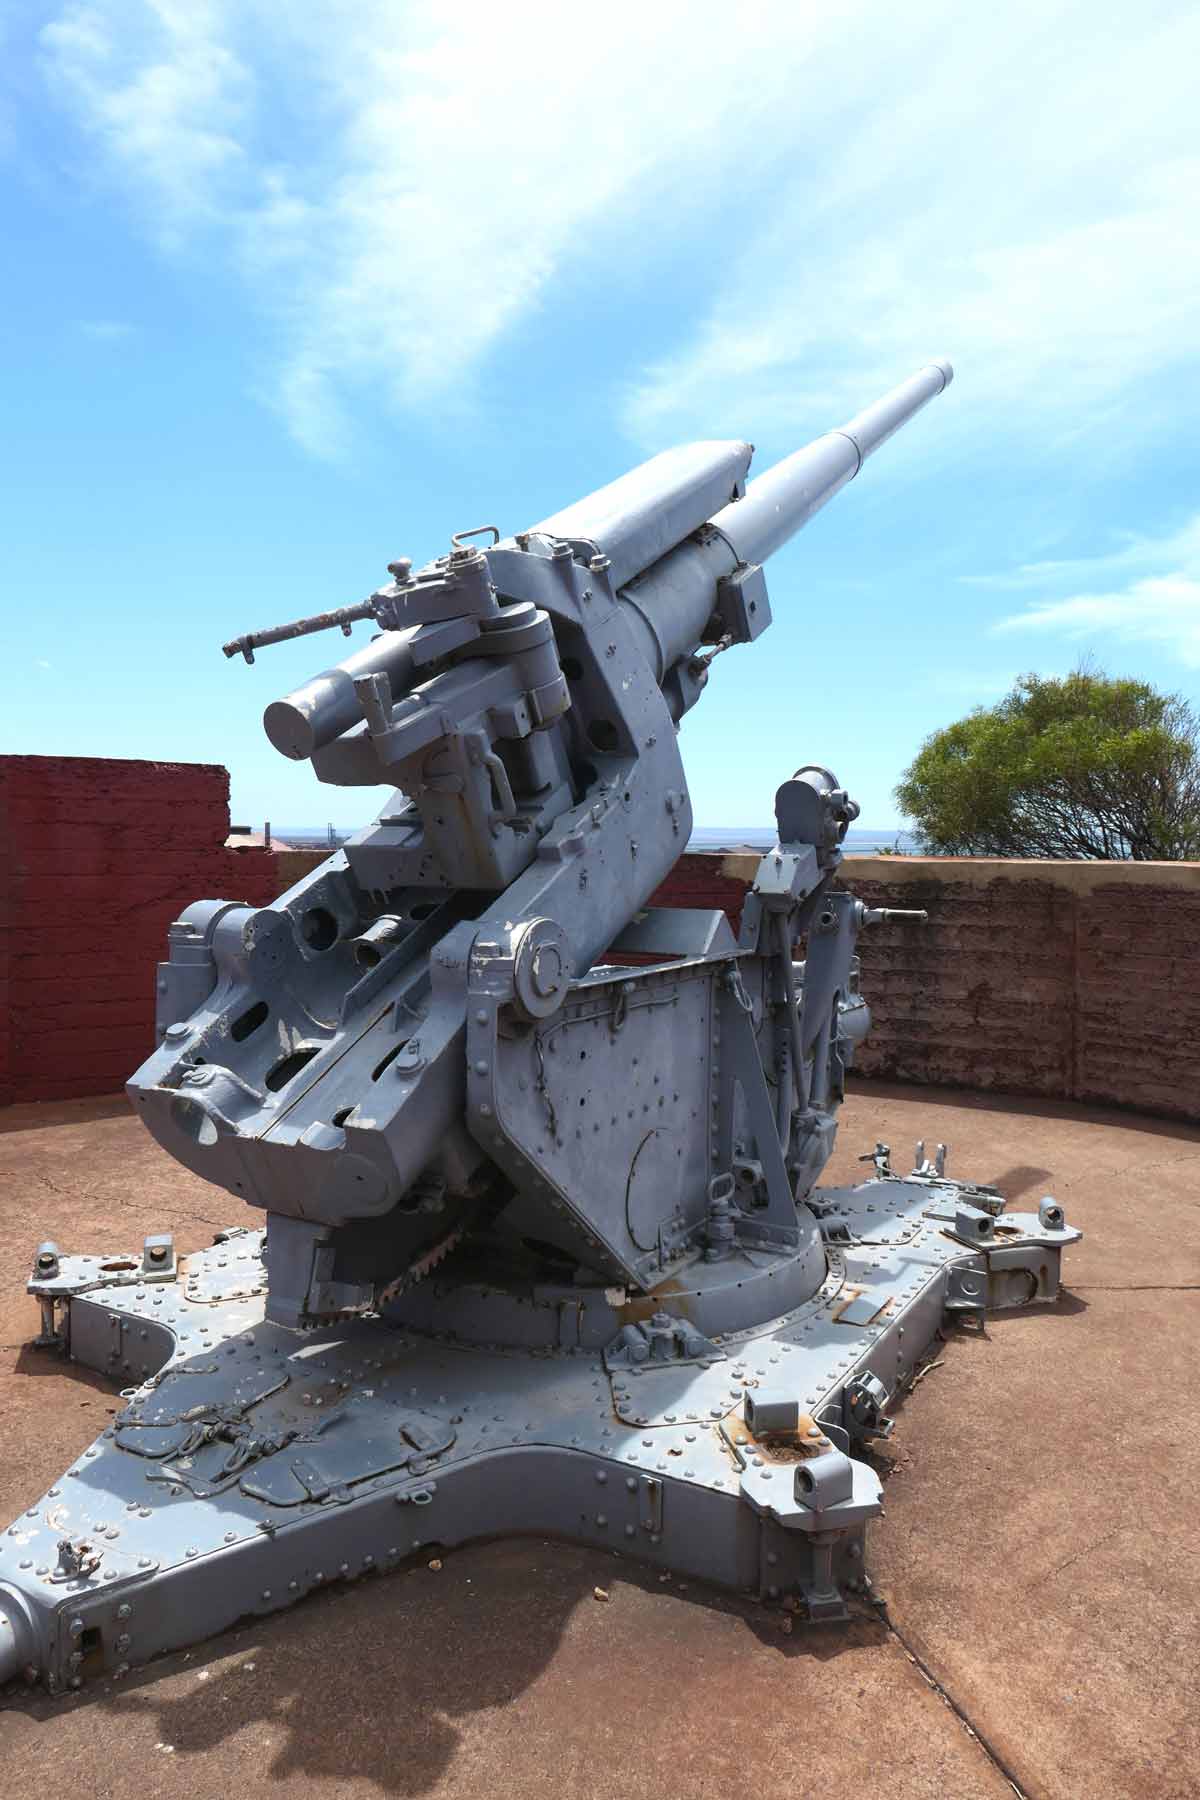 Restored WW2 gun at Hummock Hill Lookout in Whyalla, Eyre Peninsula, South Australia